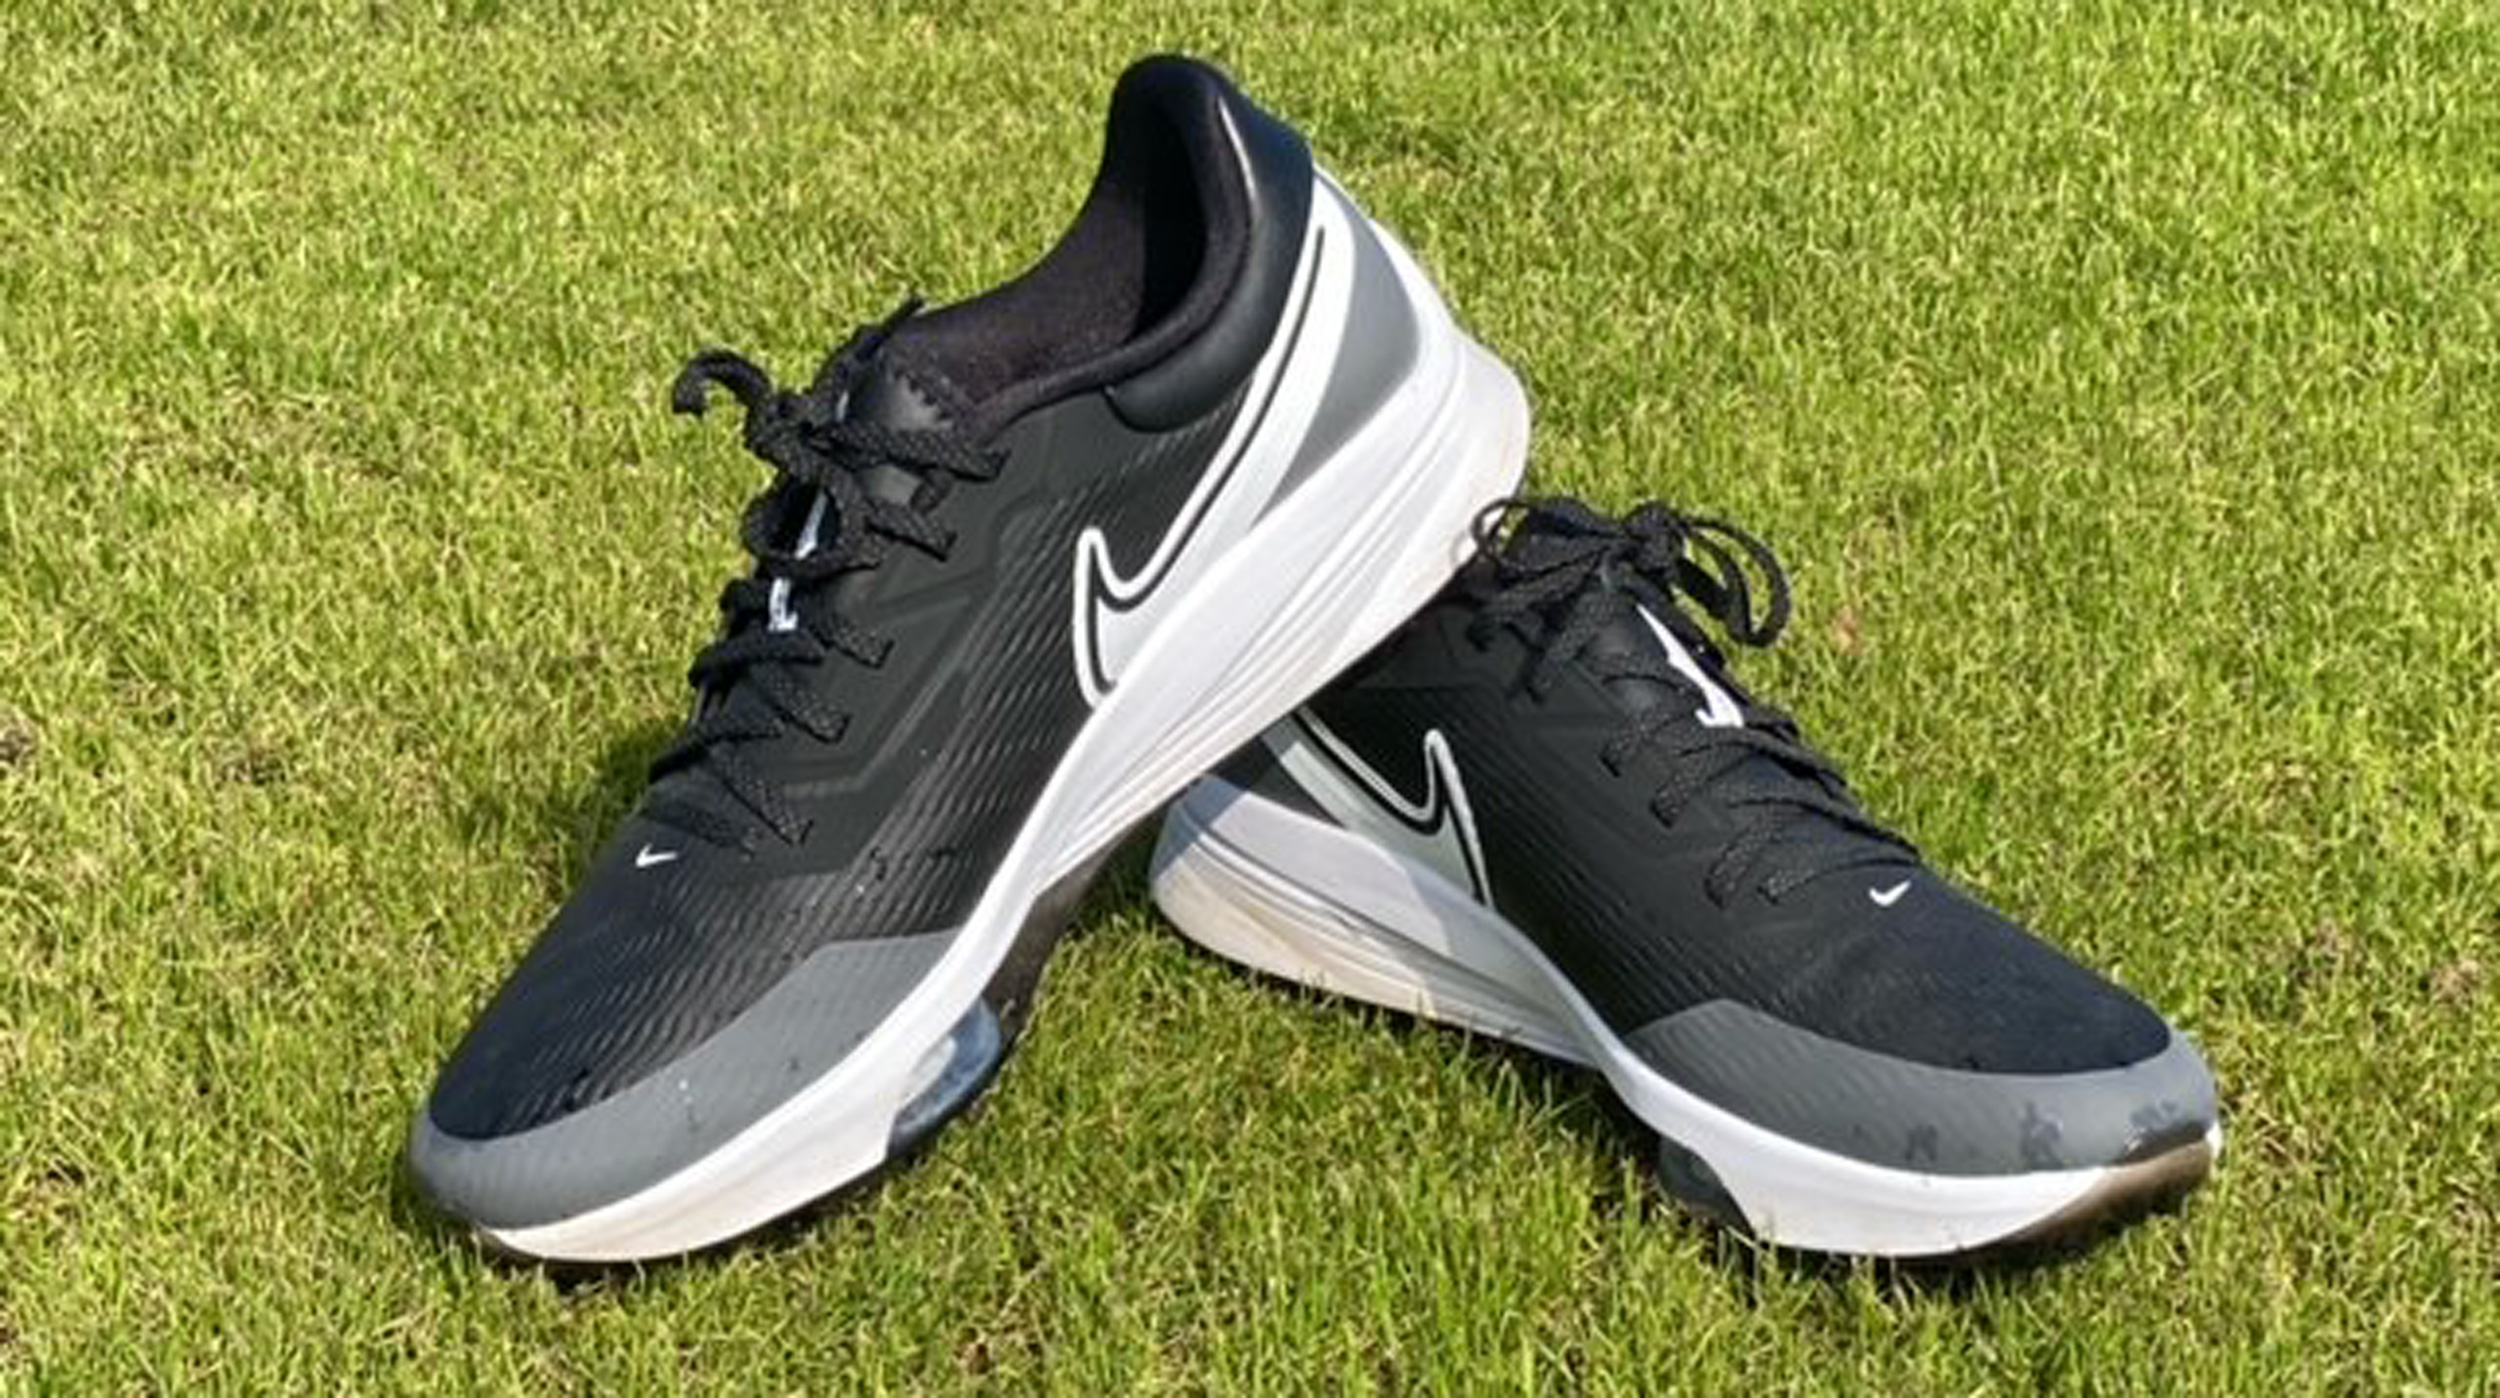 Nike Air Zoom Infinity Tour NEXT% Shoes Review | Golf Monthly